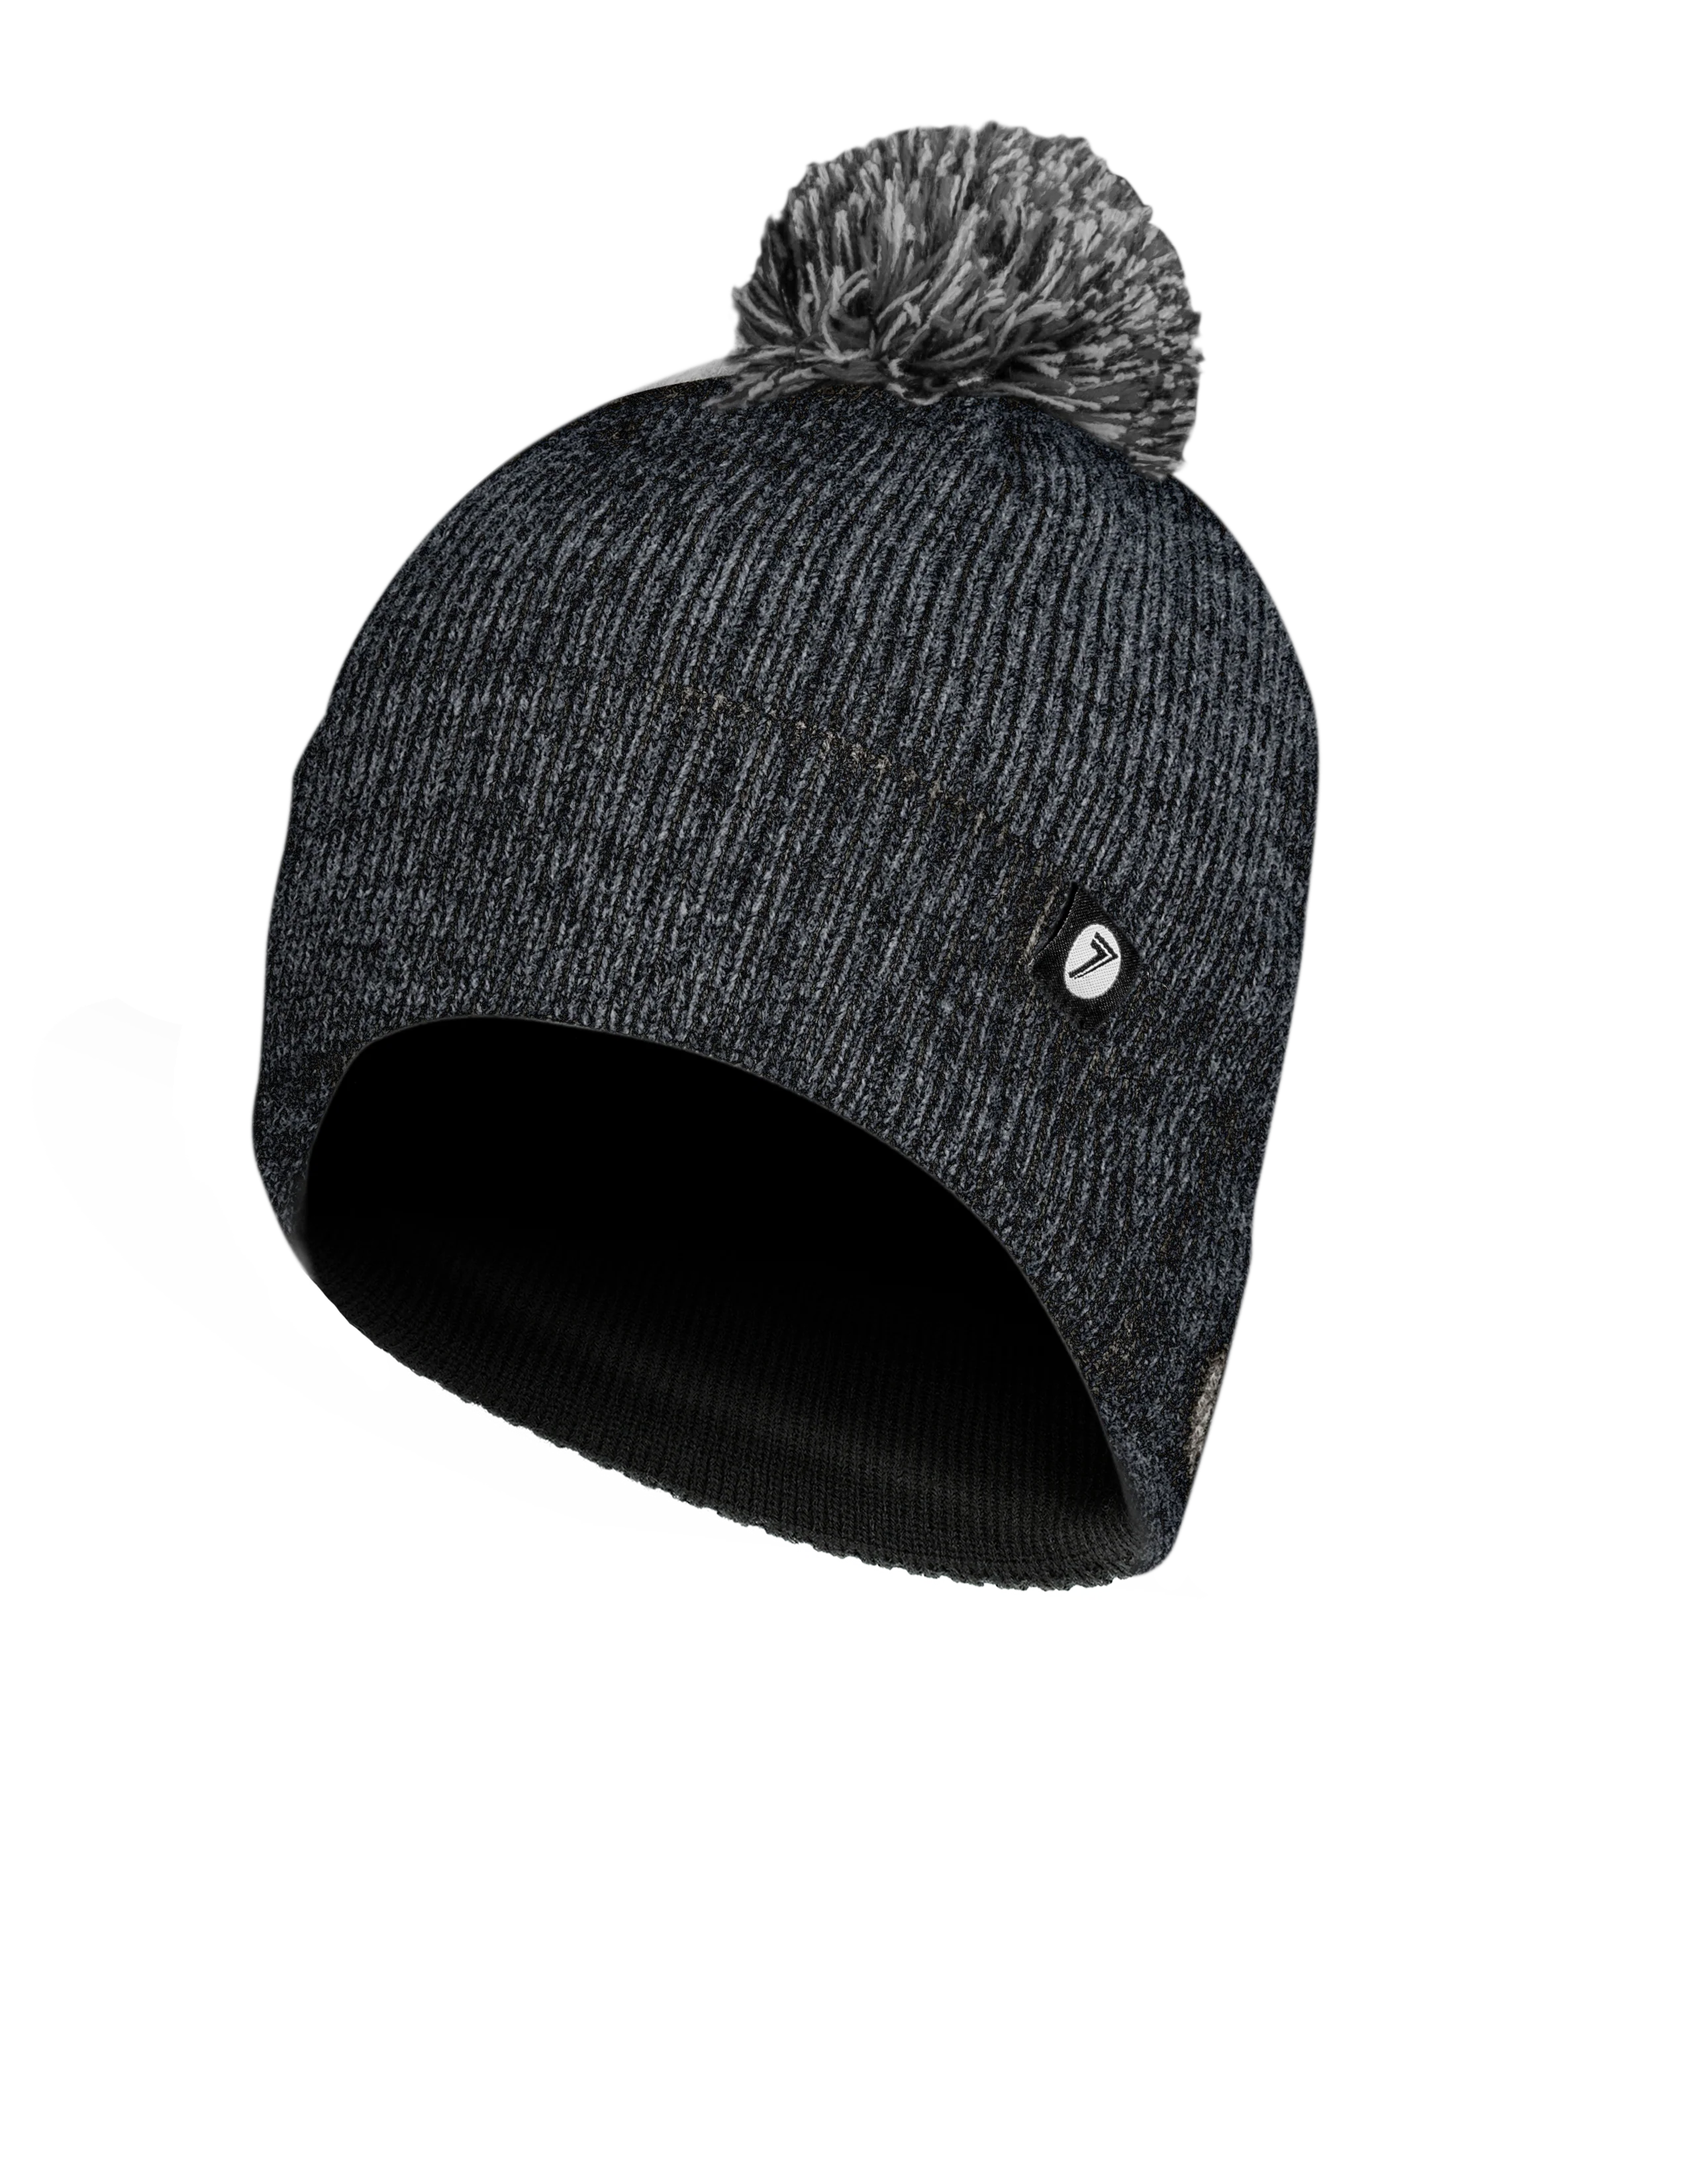 Defined Beanie Charcoal Heather